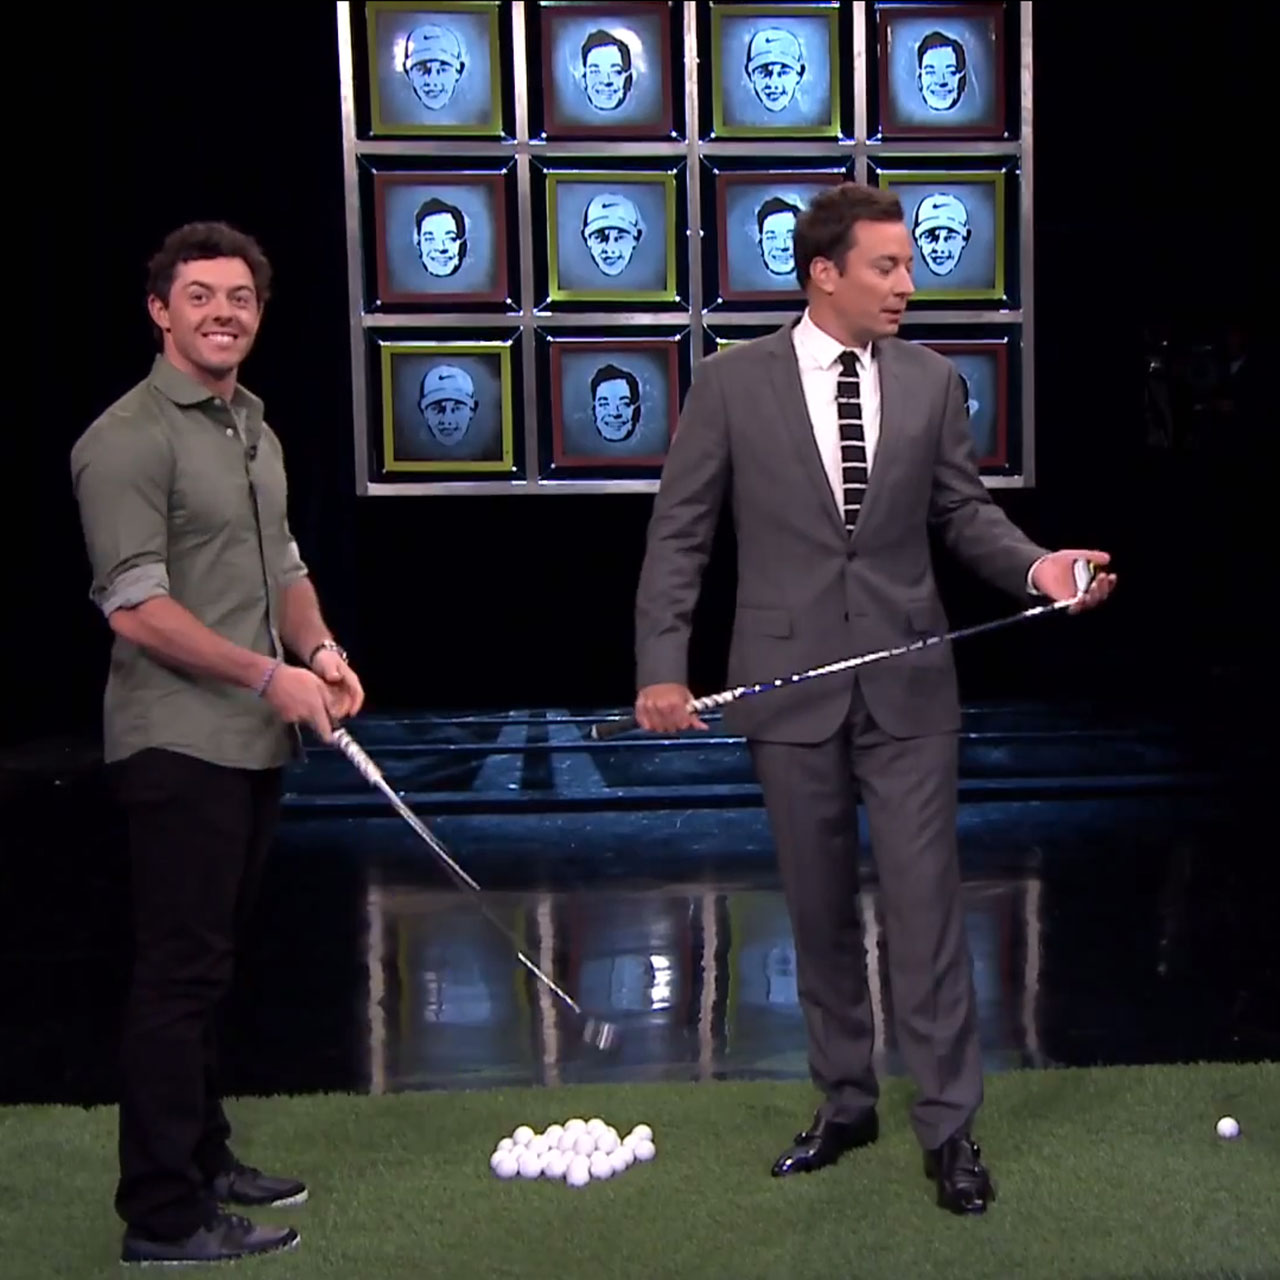 Rory McIlroy plays Jimmy Fallon in facebreakers